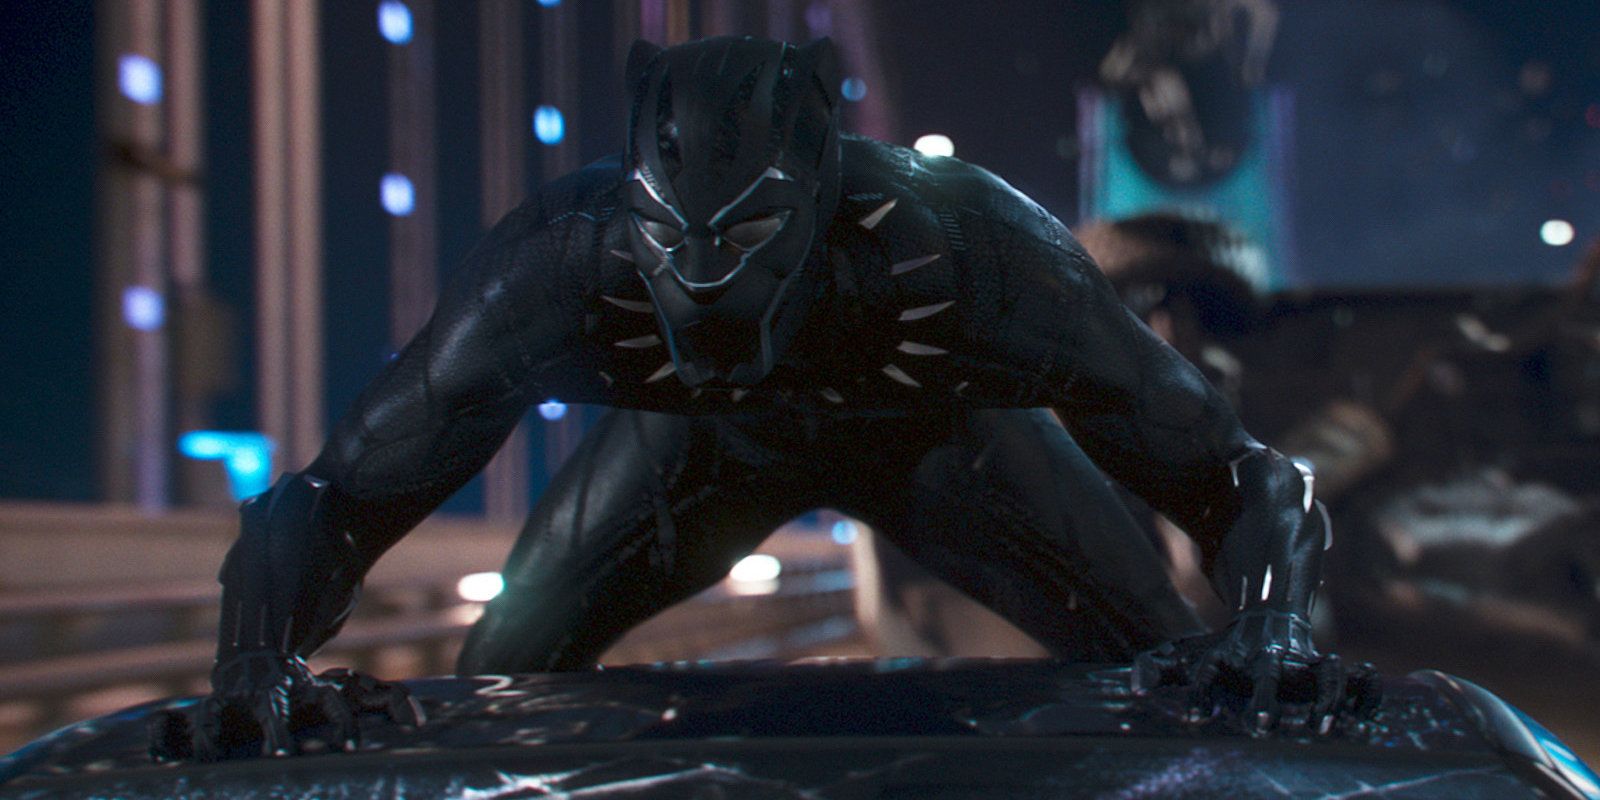 Black Panther crouches on top of a car in Black Panther.